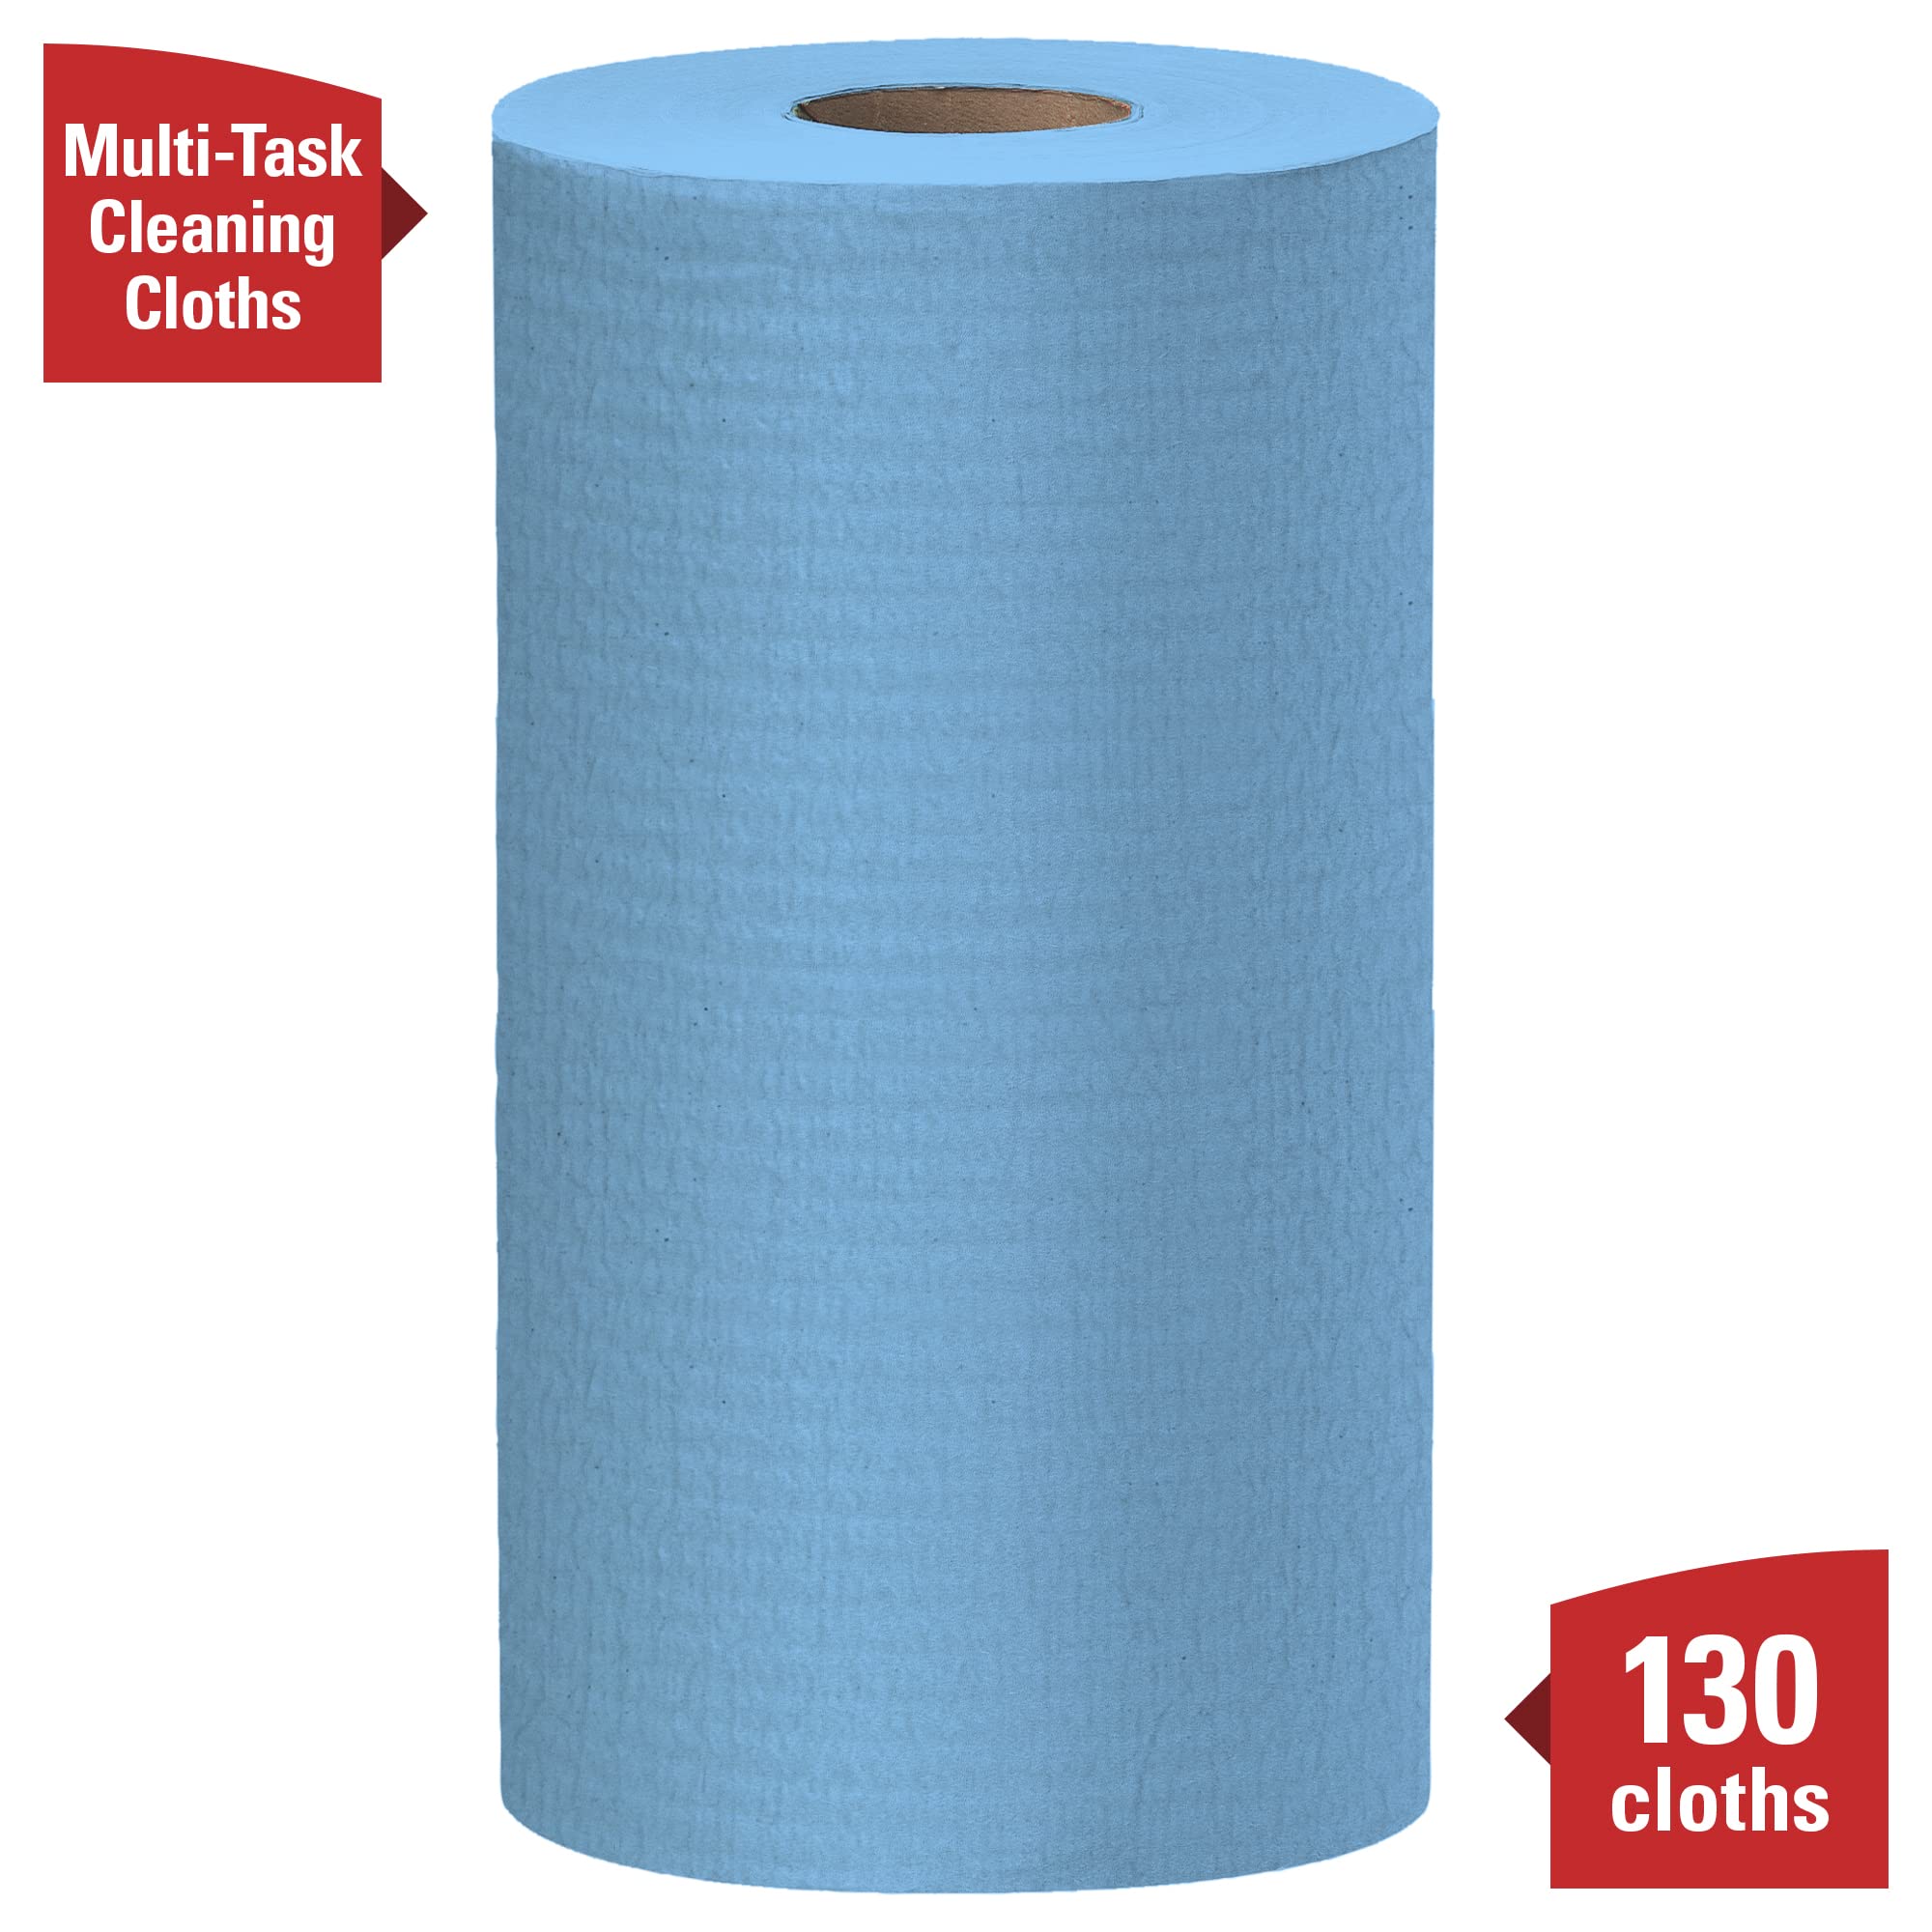 WypAll General Clean X60 Multi-Task Cleaning Cloths (35411), Small Roll, Blue, 130 Sheets / Roll, 12 Rolls / Case, 1,560 Wipes / Case